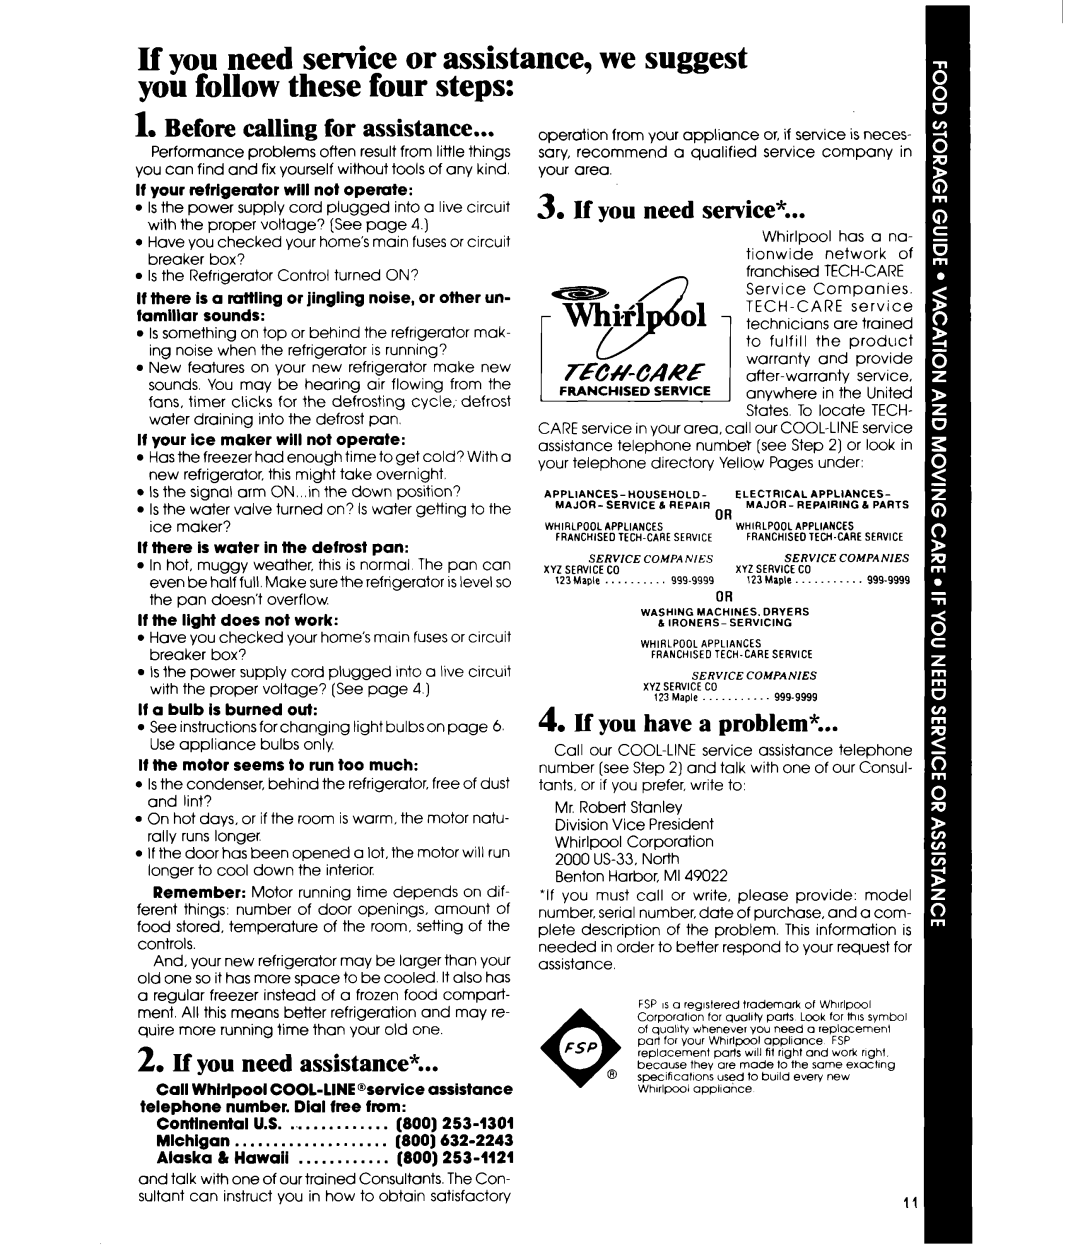 Whirlpool ET16JM manual Before calling for assistance, If you need assistance, If you need service, If you have a problem 